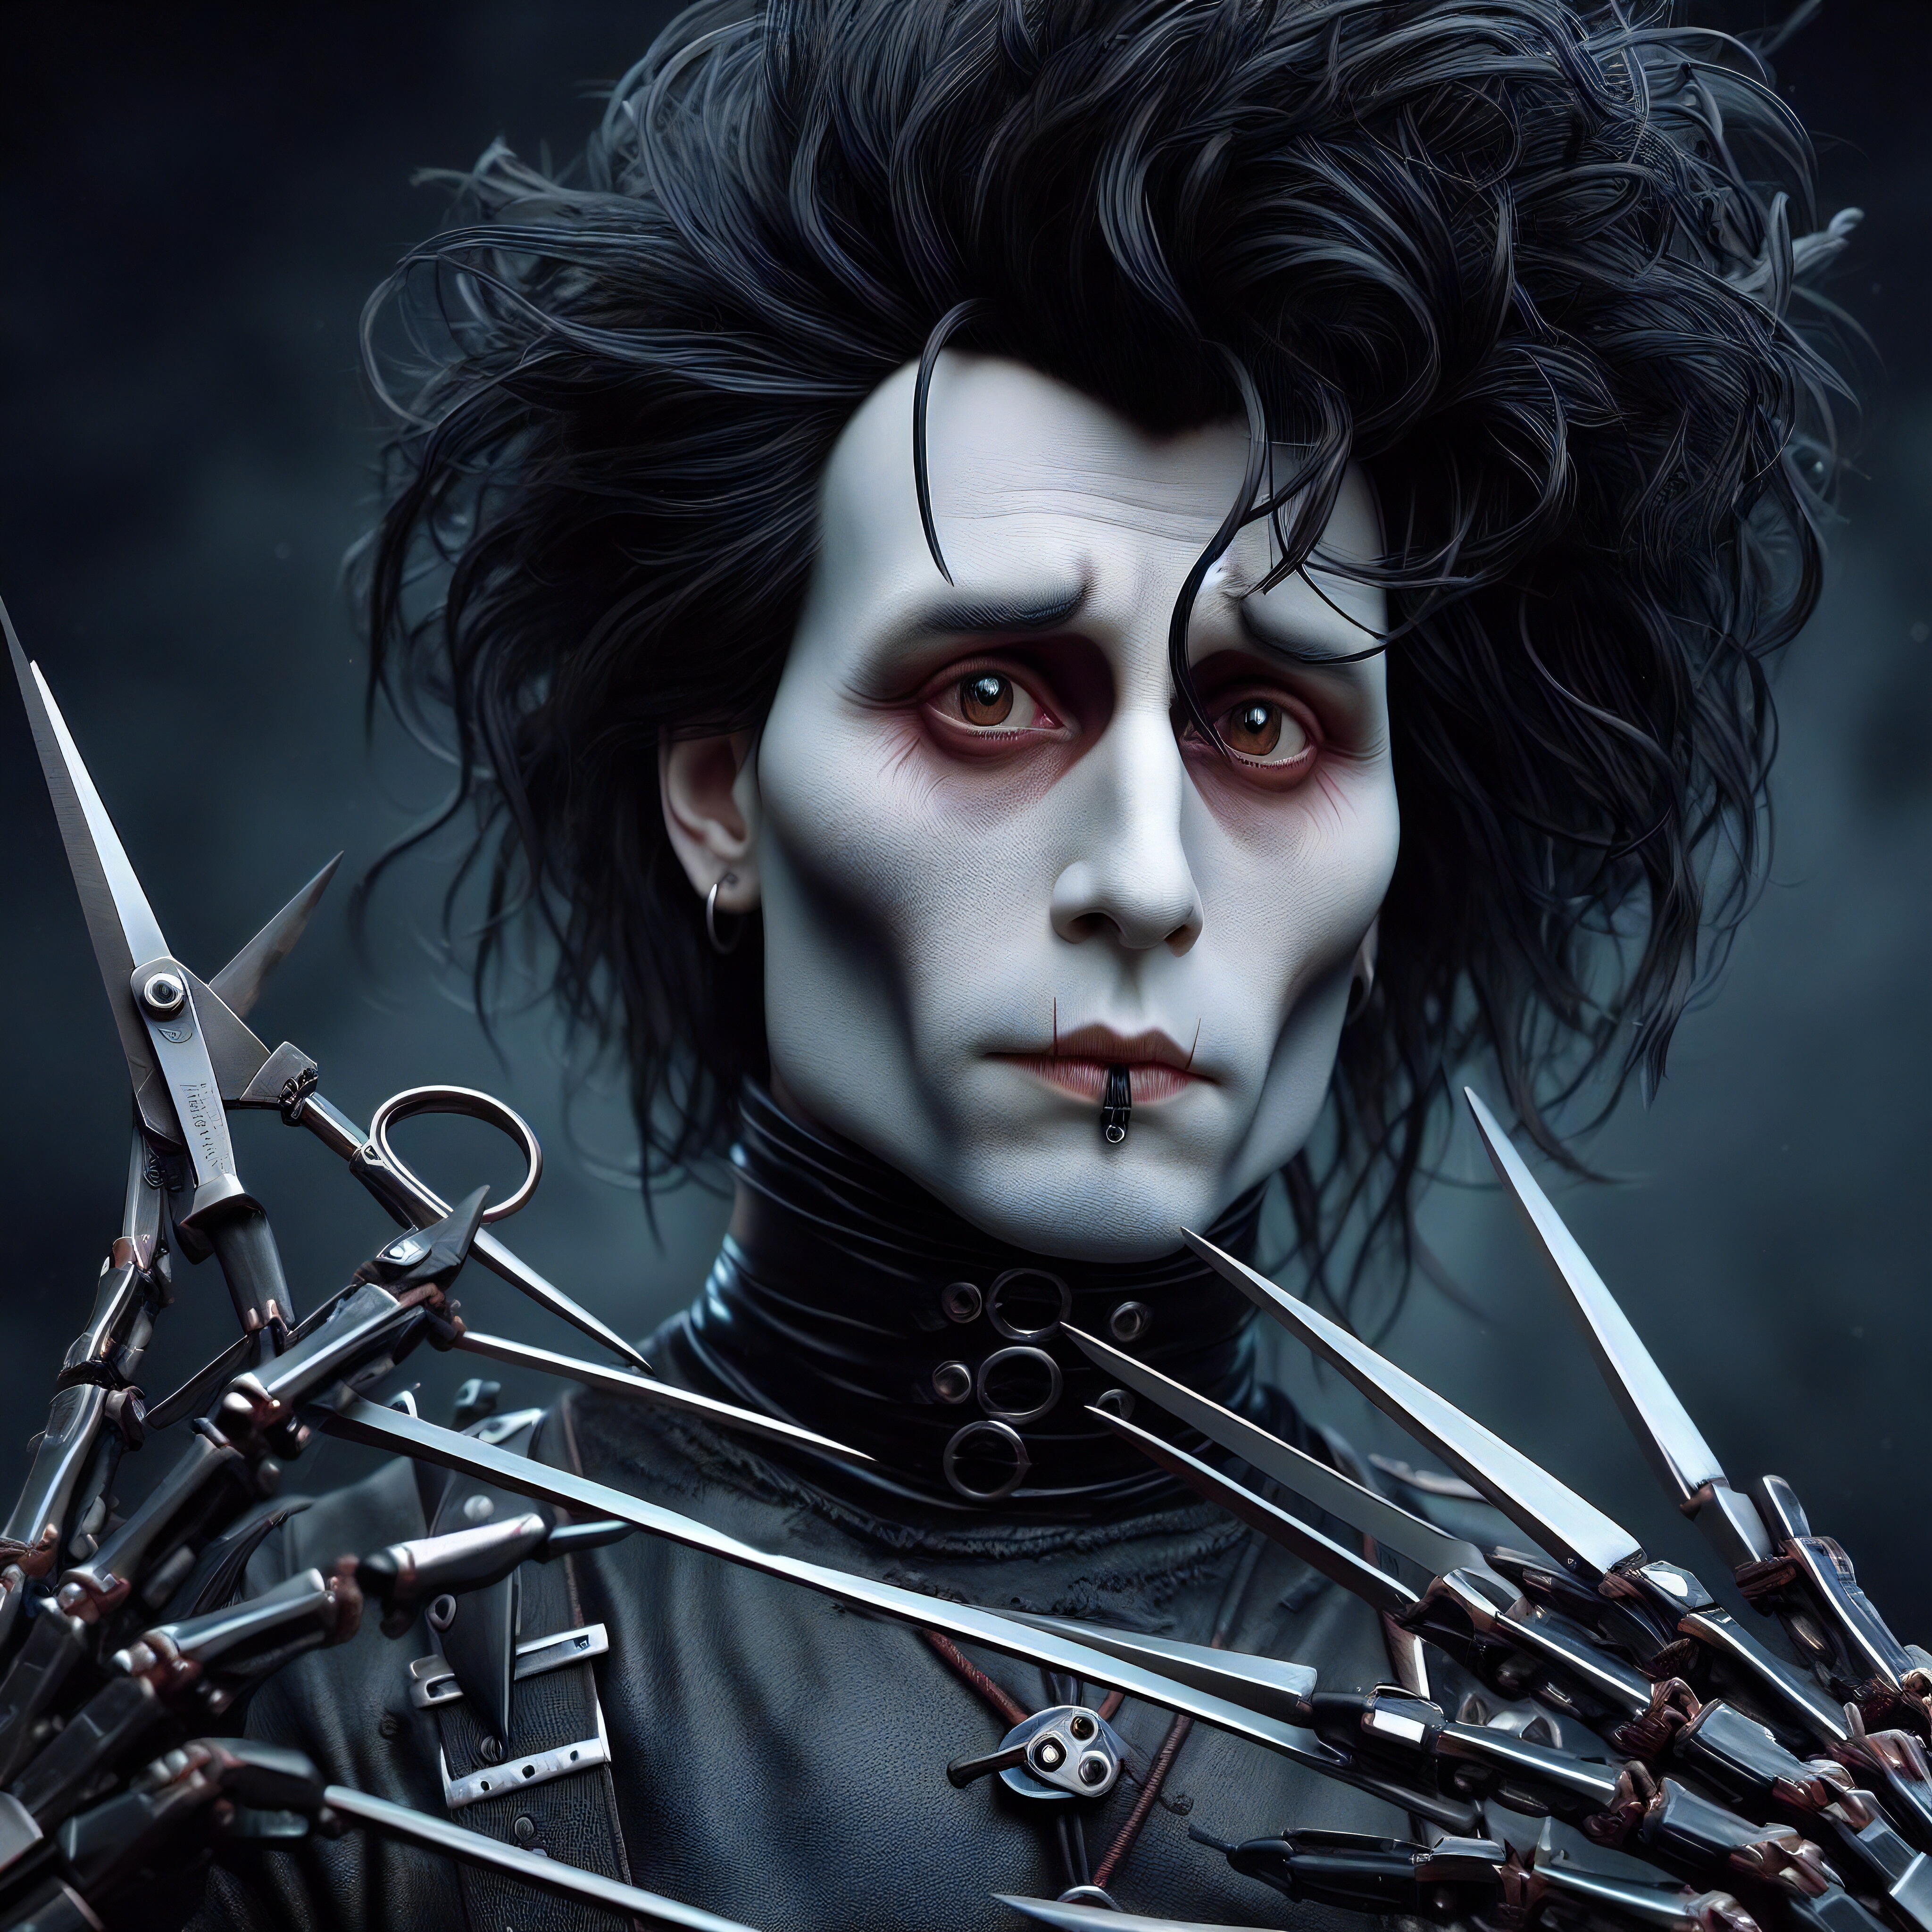 General 4096x4096 Edward Scissorhands movies movie characters AI art looking at viewer digital art scissors closed mouth messy hair blurred blurry background earring